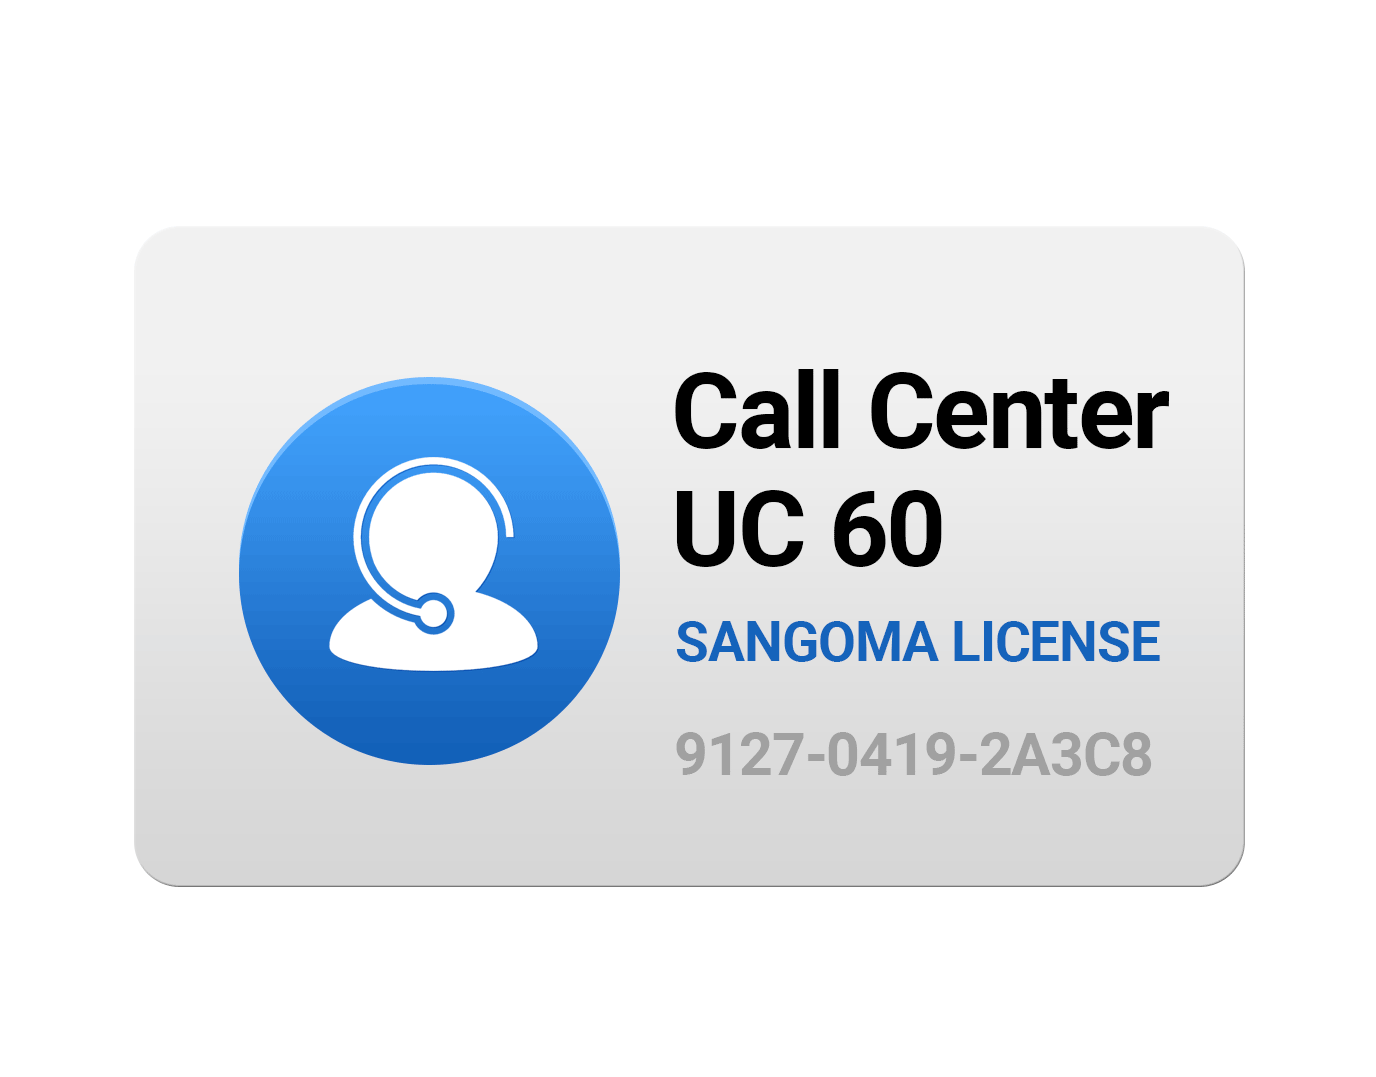 Call Center Features License for UC 60